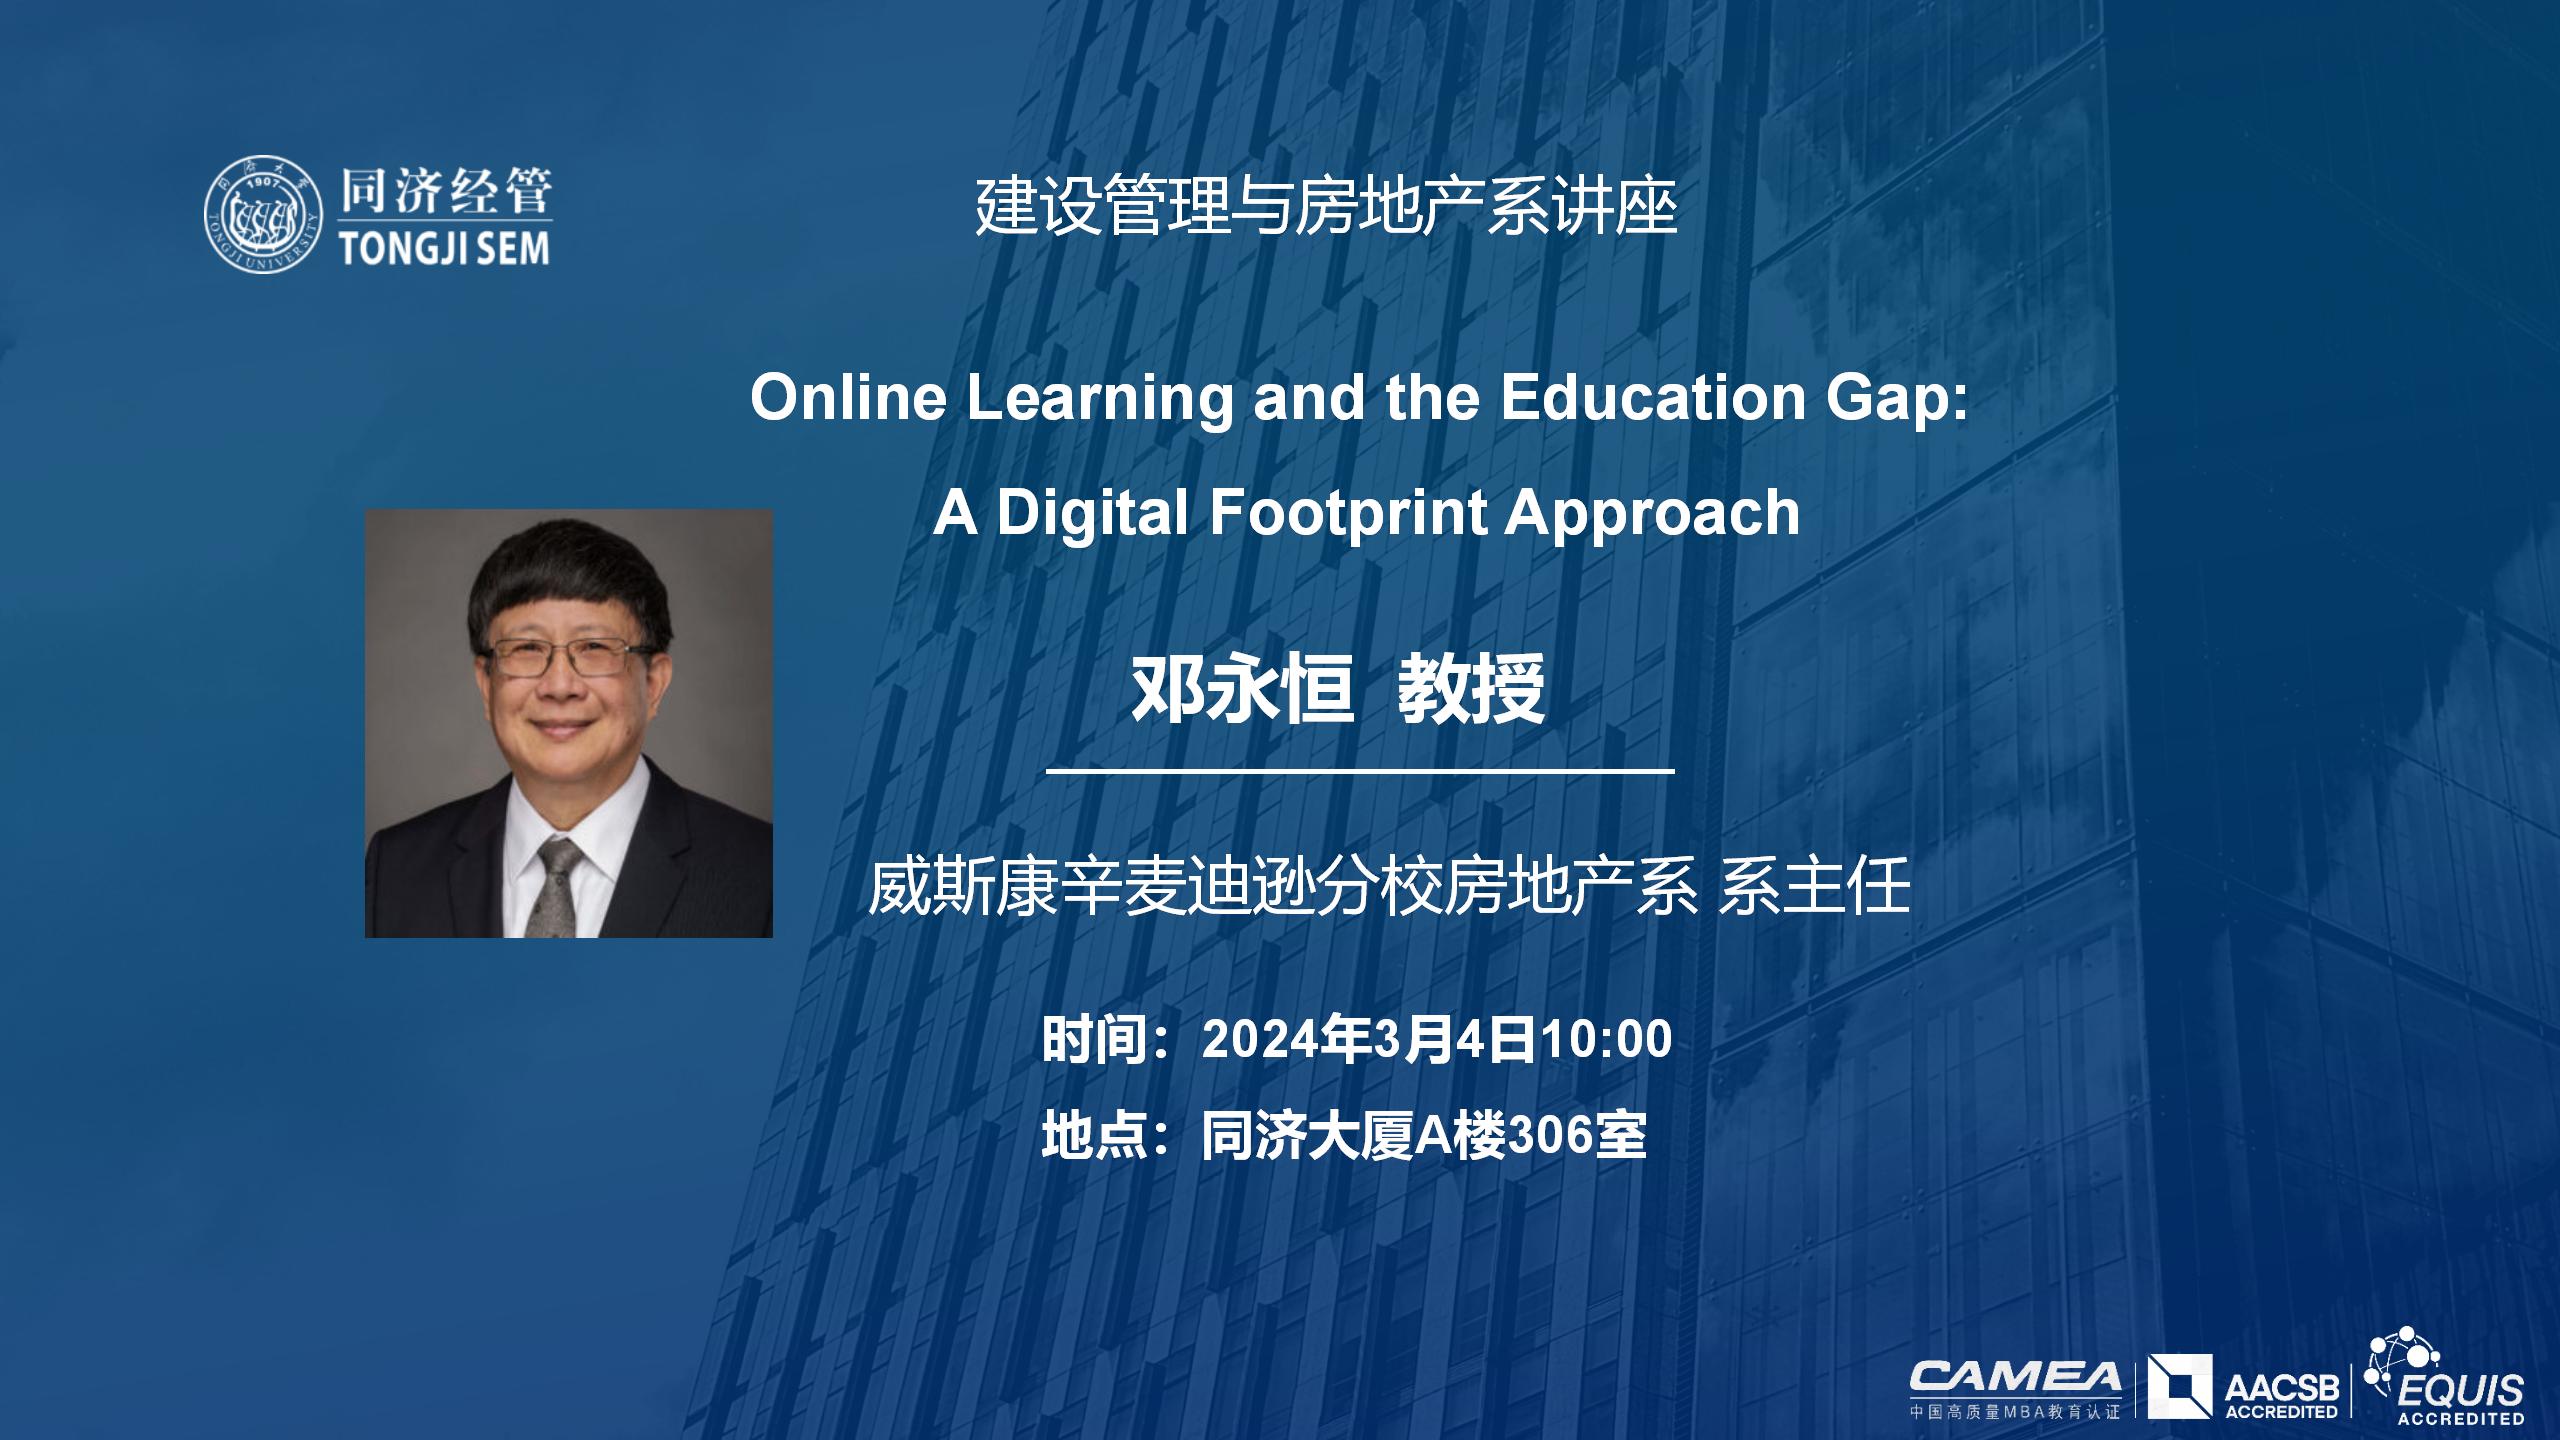 Online Learning and the Education Gap: A Digital Footprint Approach